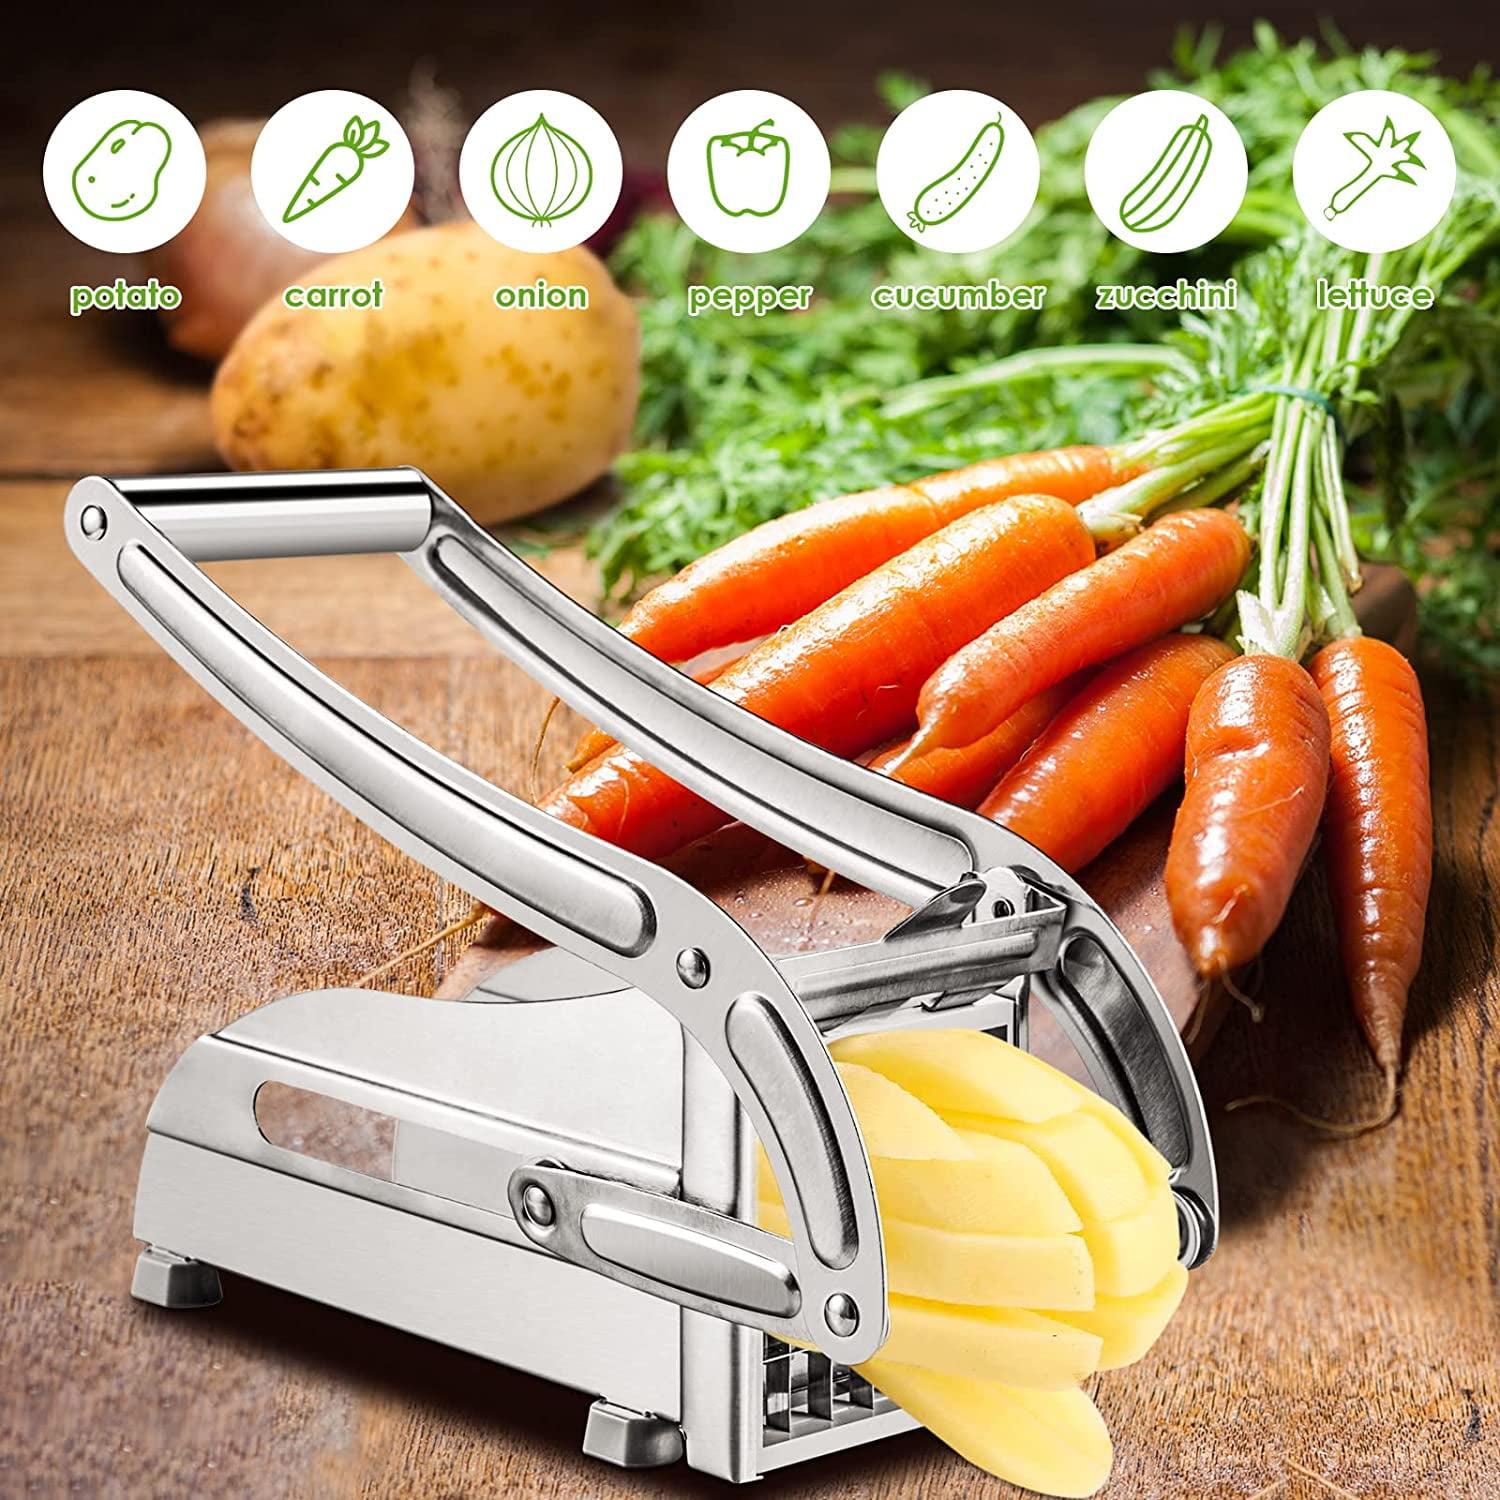 Jytue French Fry Cutter Multifunction Potato Slicer Vegetable Fruit Chopper with 2 Stainless Steel Blades for French Fries Chips Maker Potato Slicer